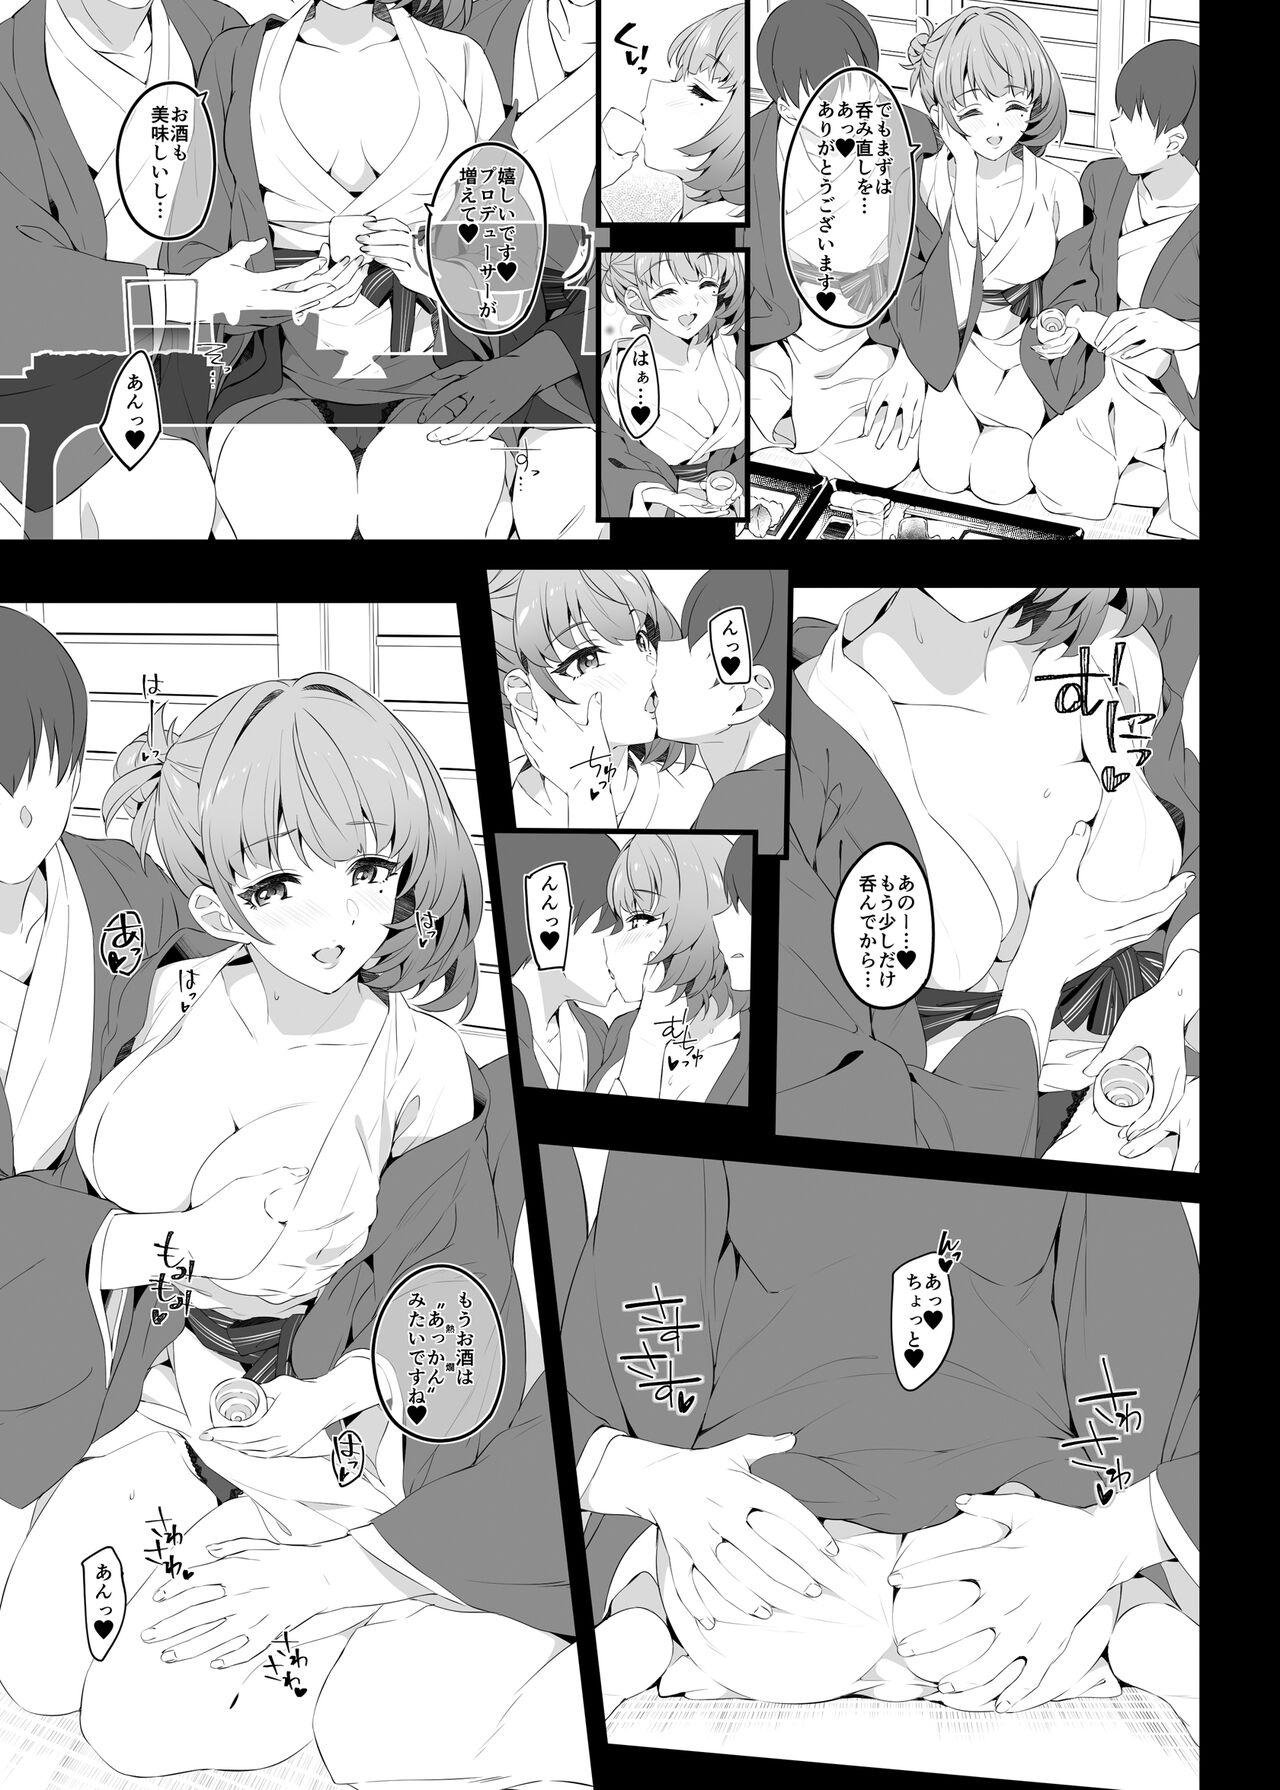 Panty Flowers blooming at night and the kings in the dream. - The idolmaster White Girl - Page 11